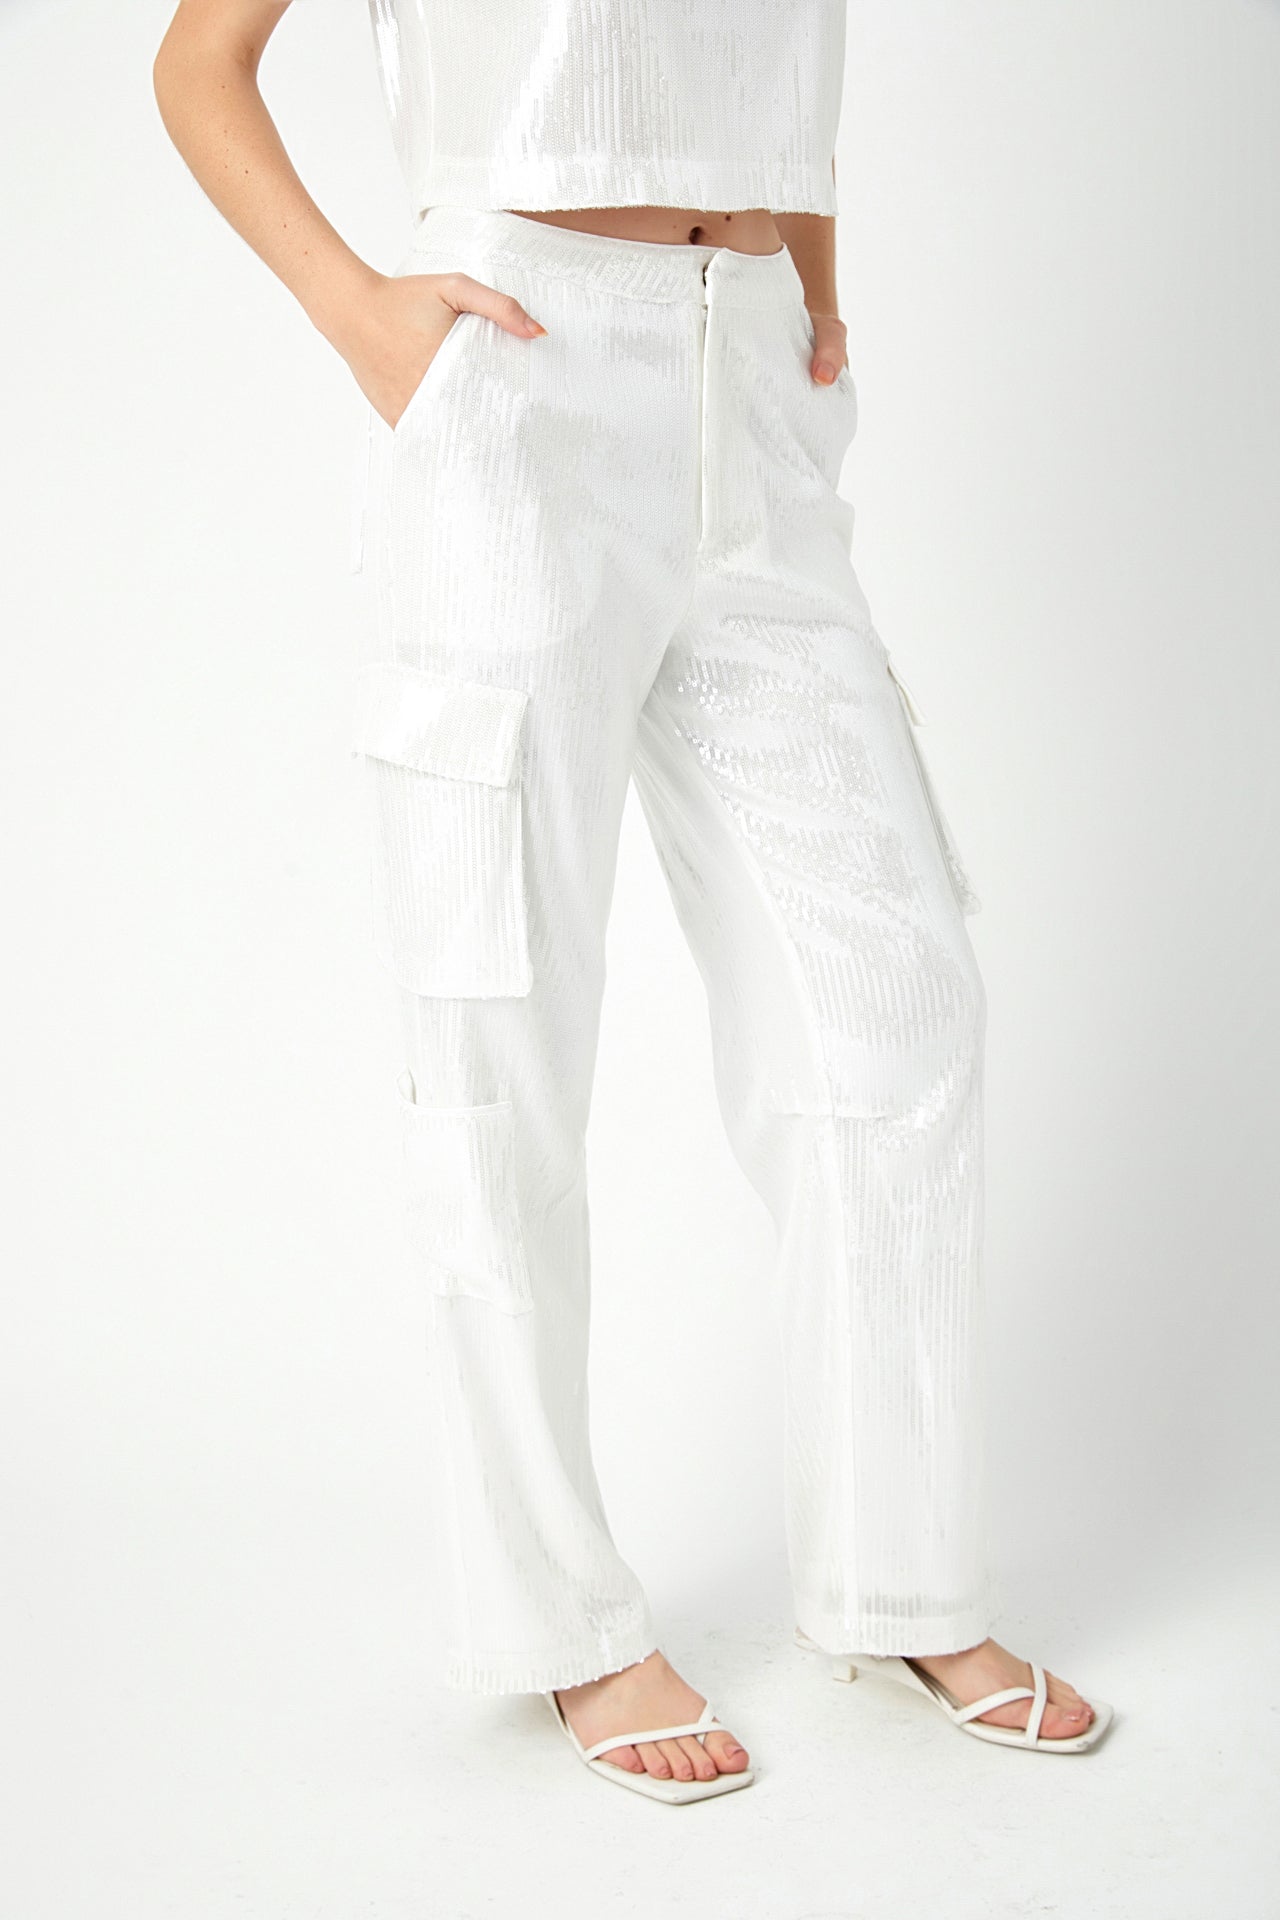 ENDLESS ROSE - Sequins Cargo Pants - PANTS available at Objectrare